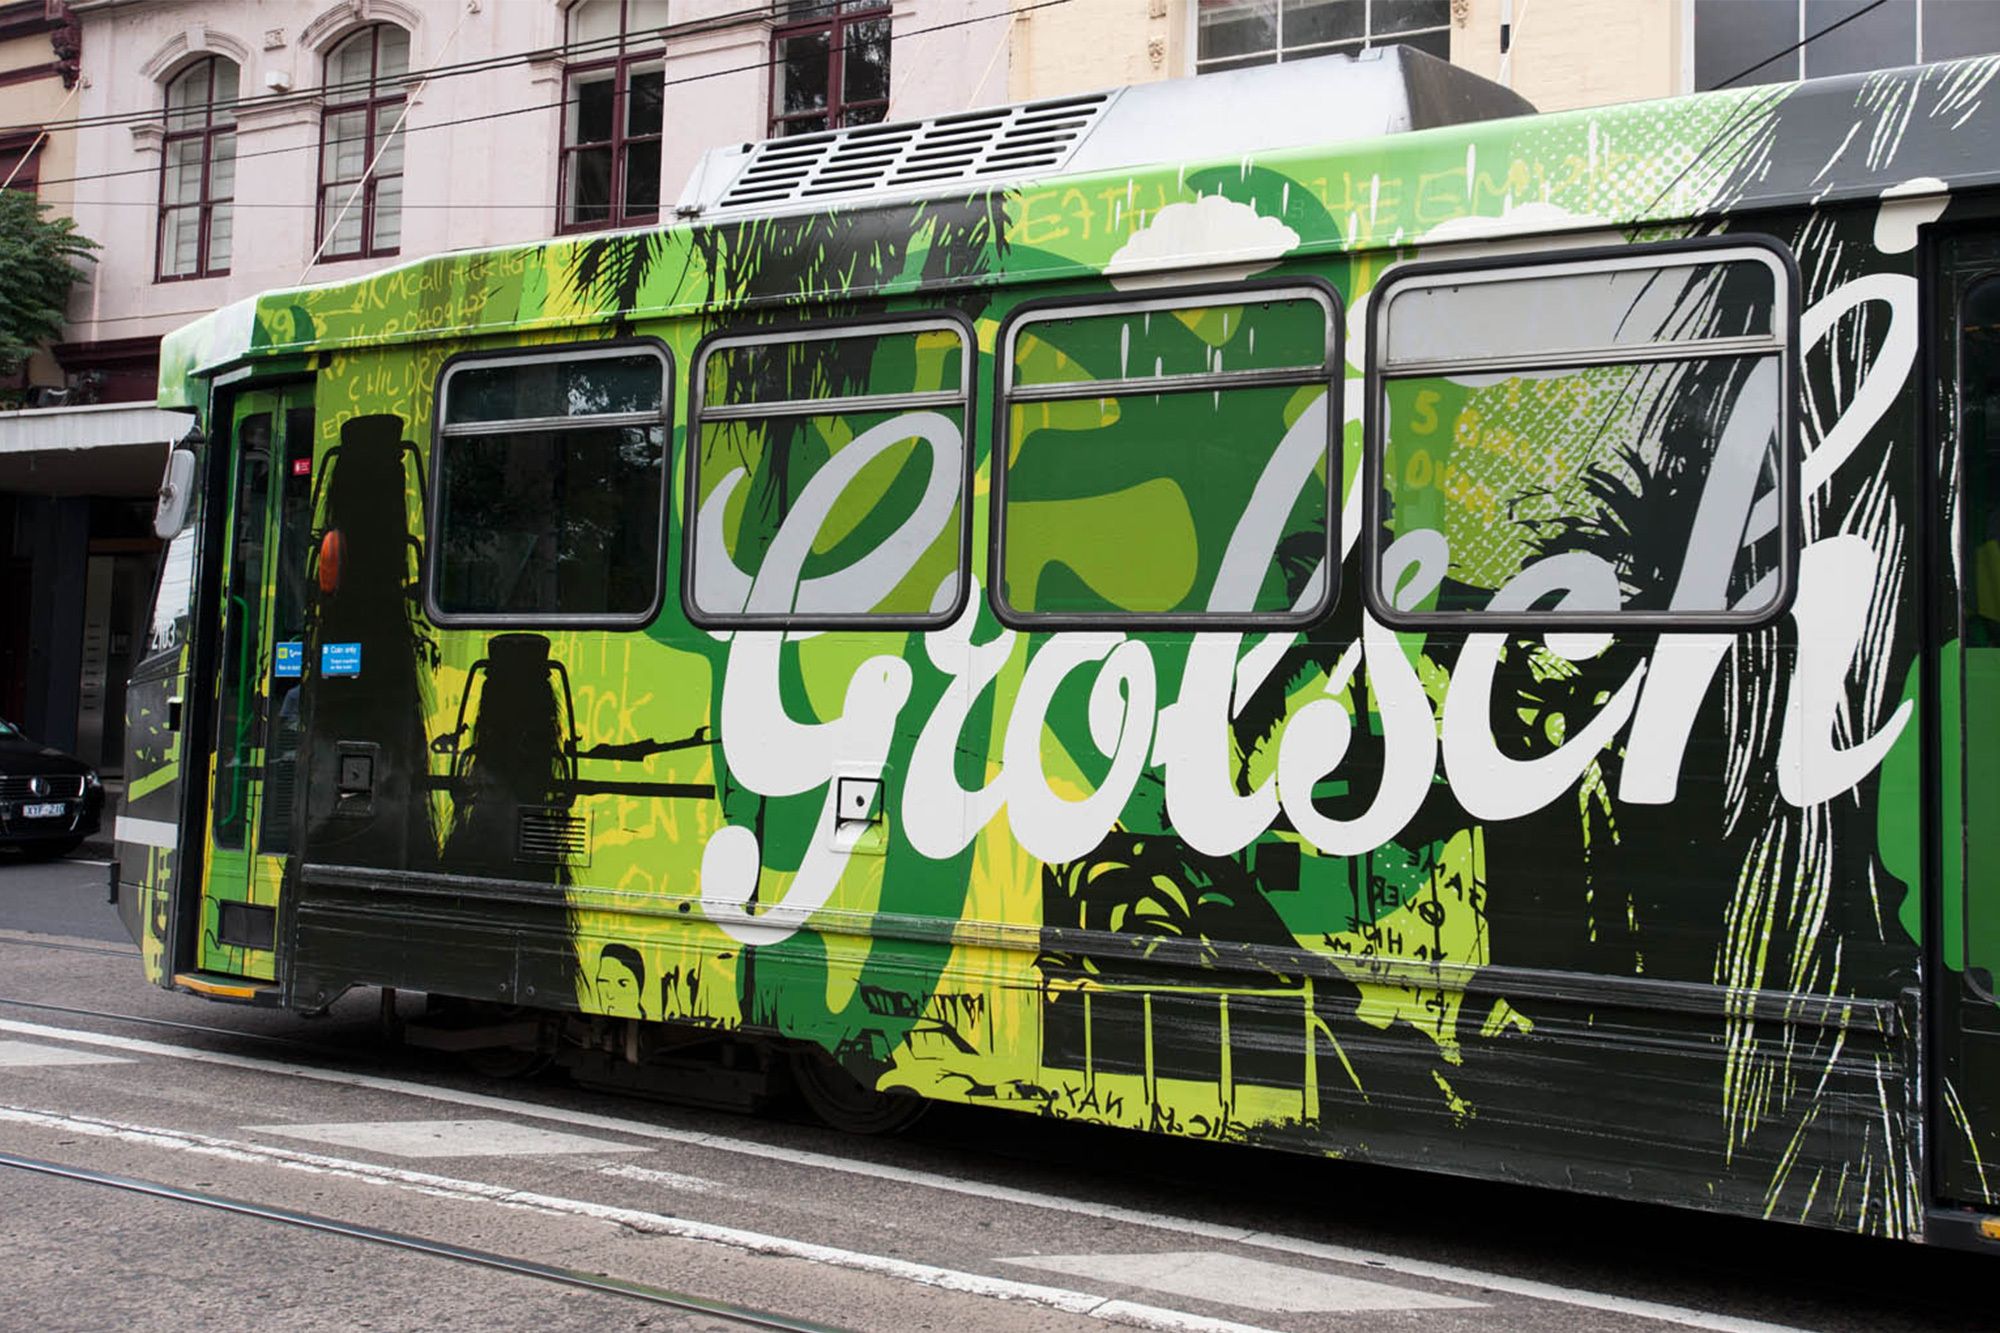 hunterand projects grolsch grid beer brand campaign grid tram